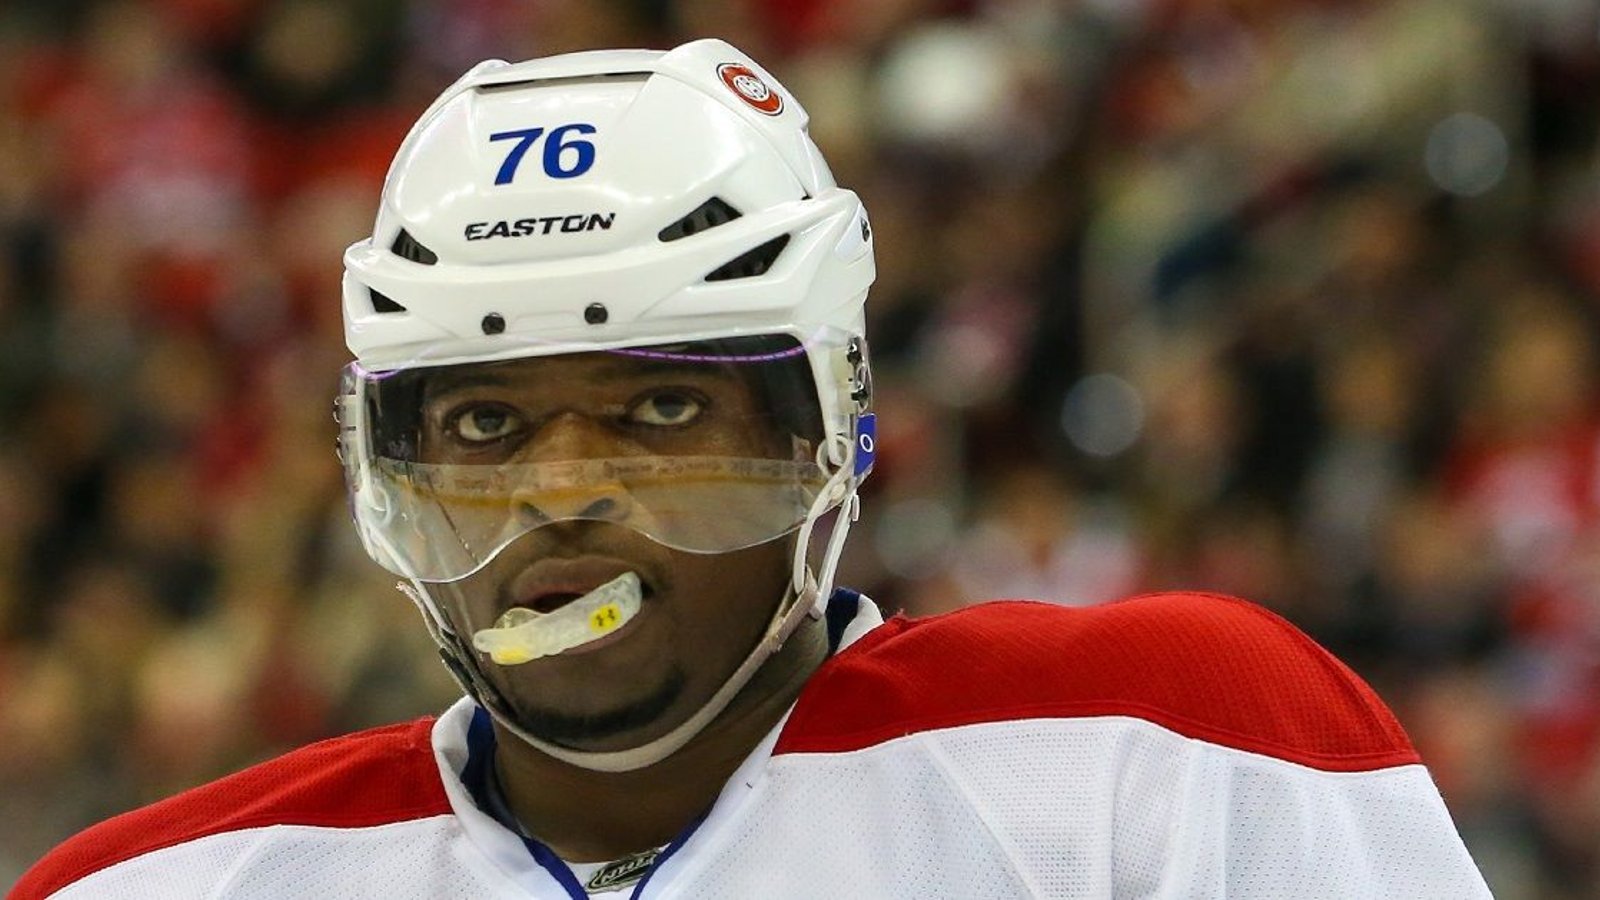 Is Subban true royalty still with the Montreal Canadiens?